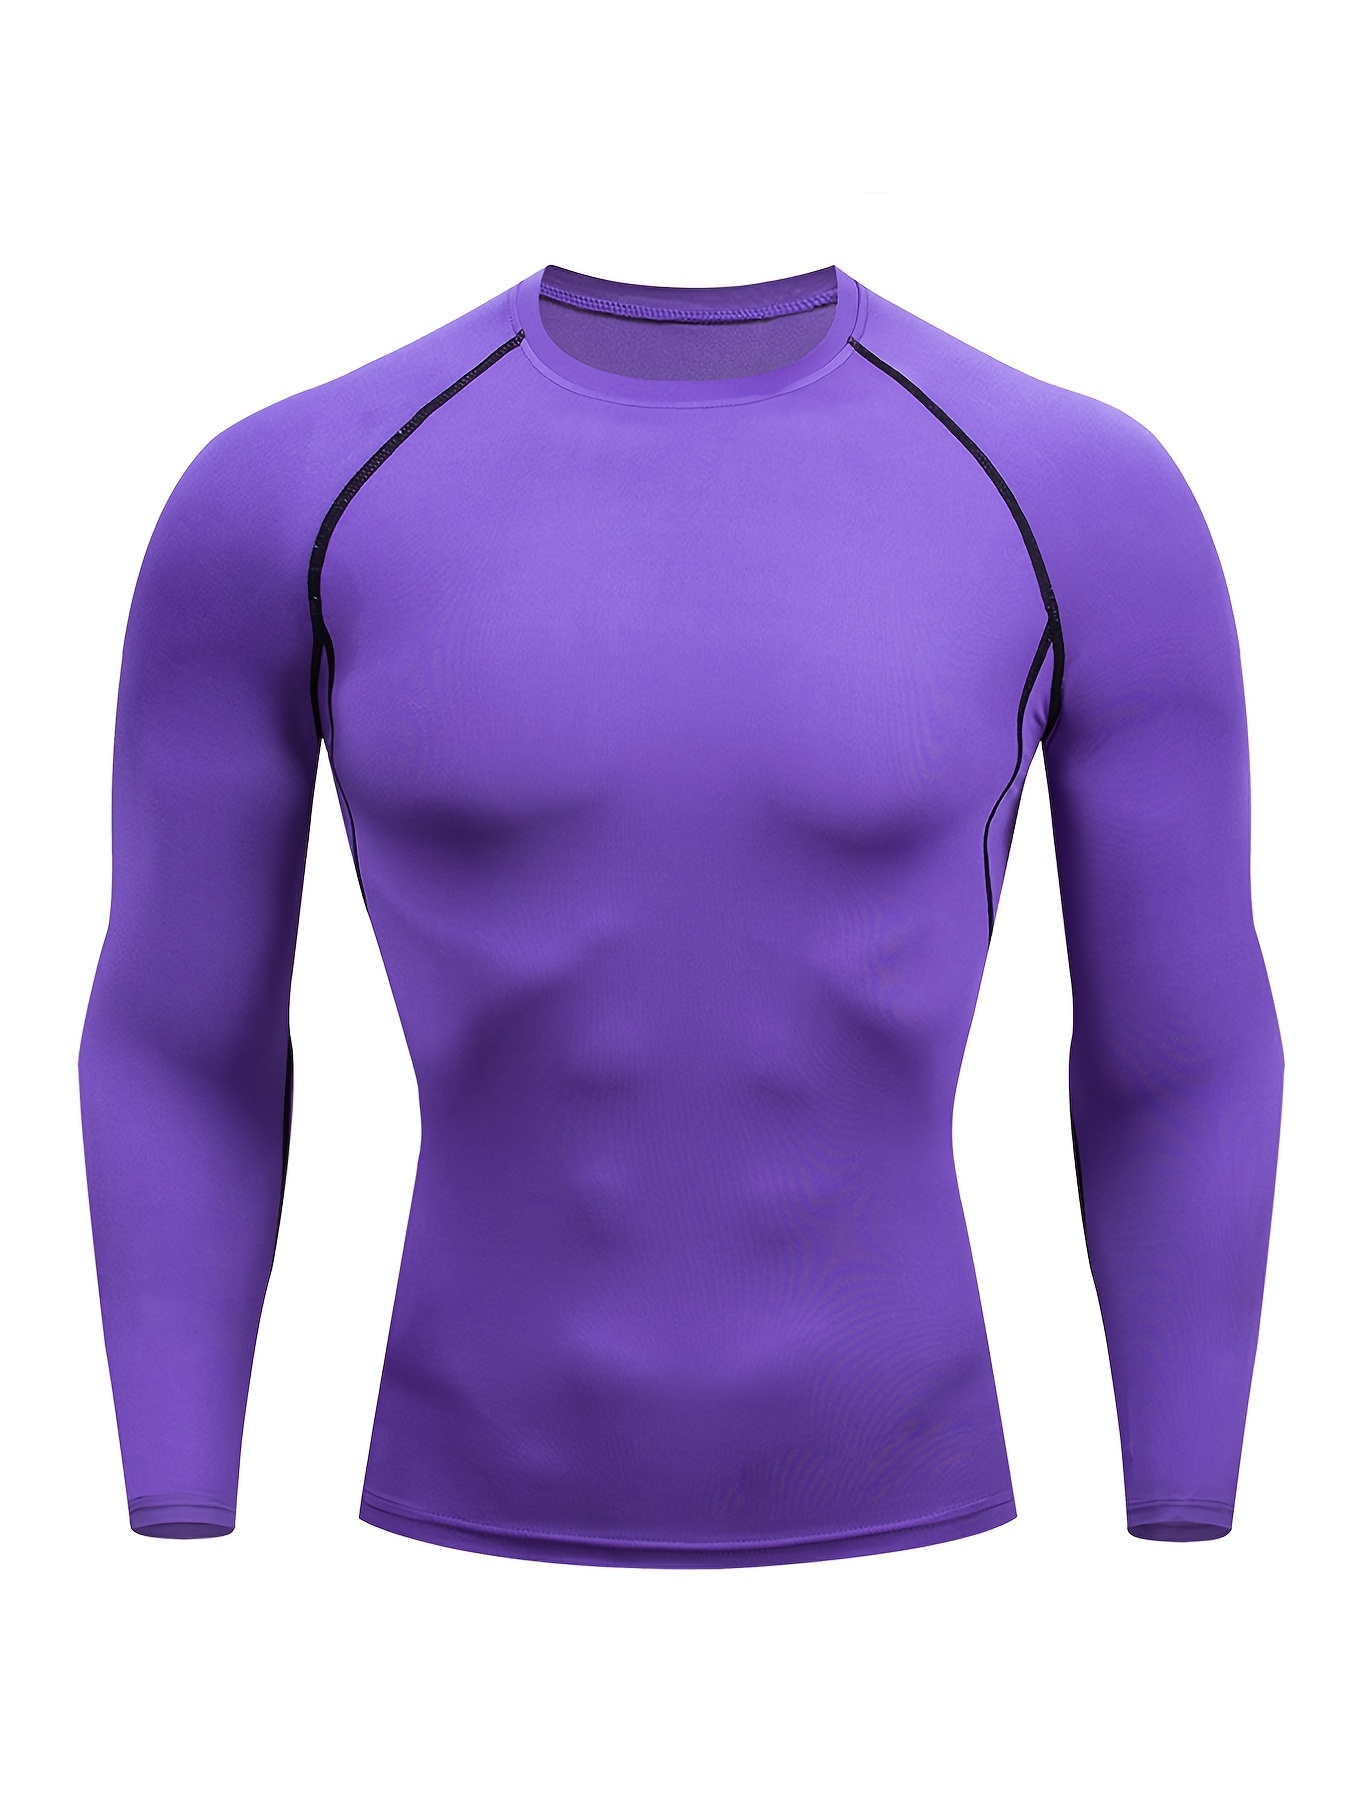 Men's Compression Shirt Long Sleeve Athletic Workout T-Shirts Top Active  Sport Baselayer Undershirt Gear Shirt Dry Fit